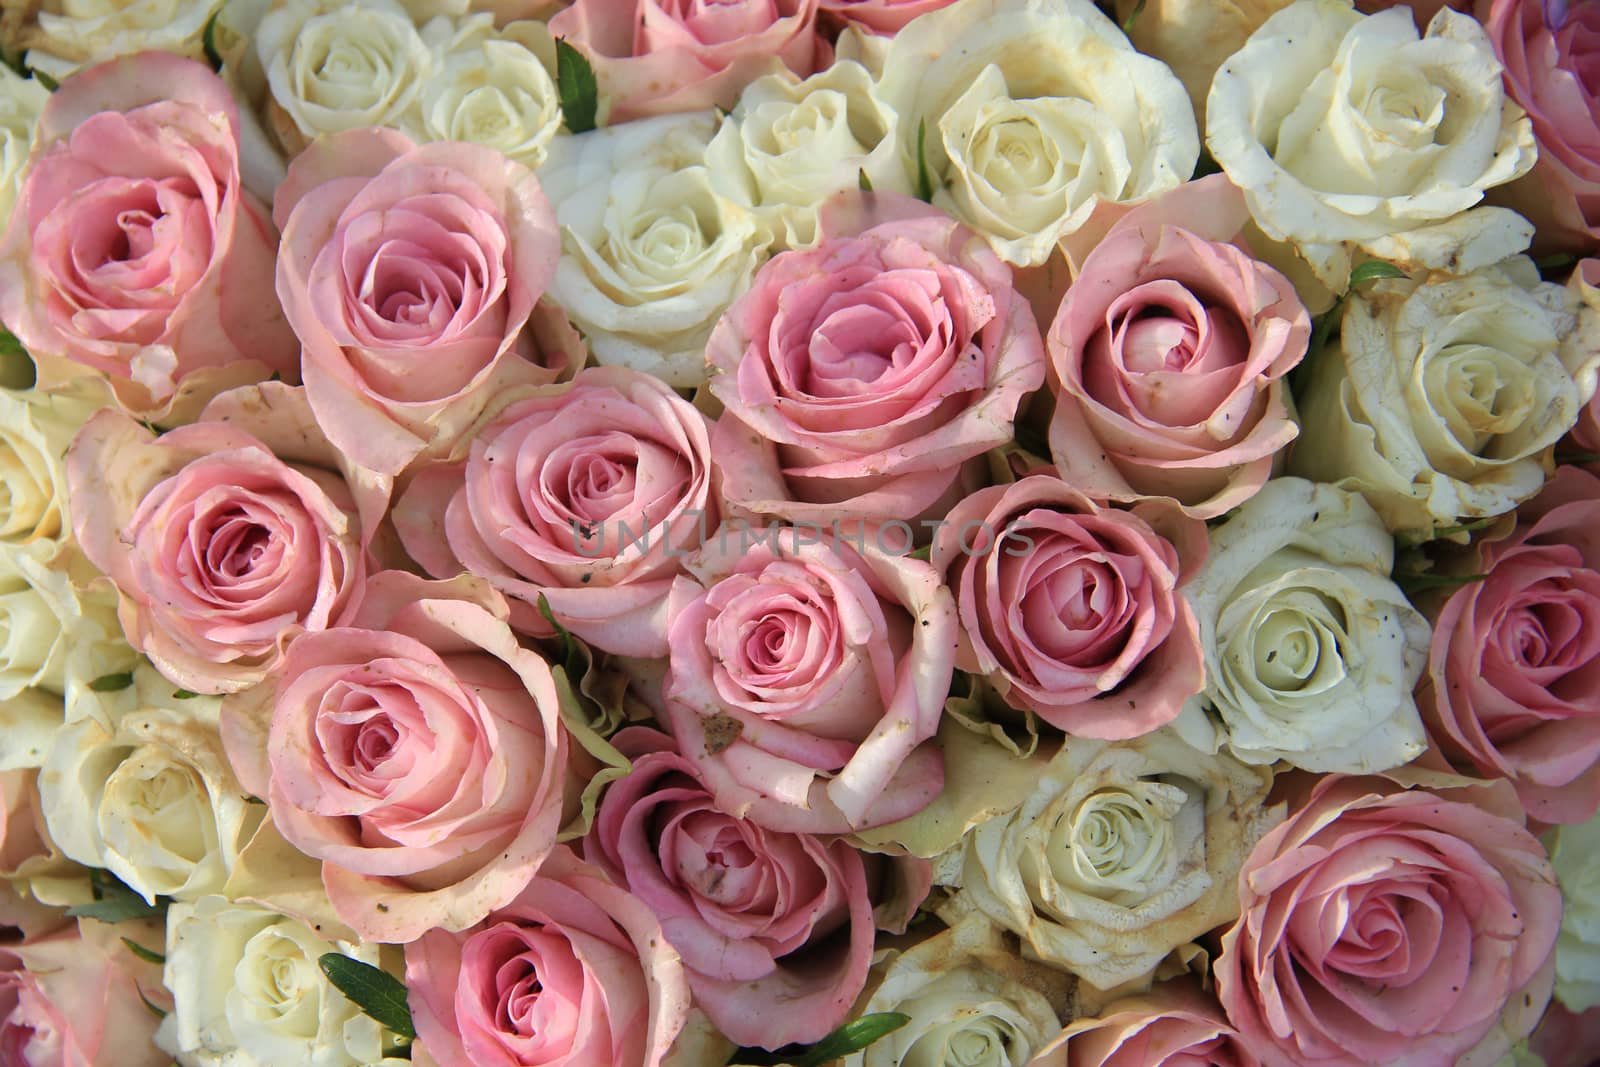 Pink and white roses in a bridal arrangement by studioportosabbia